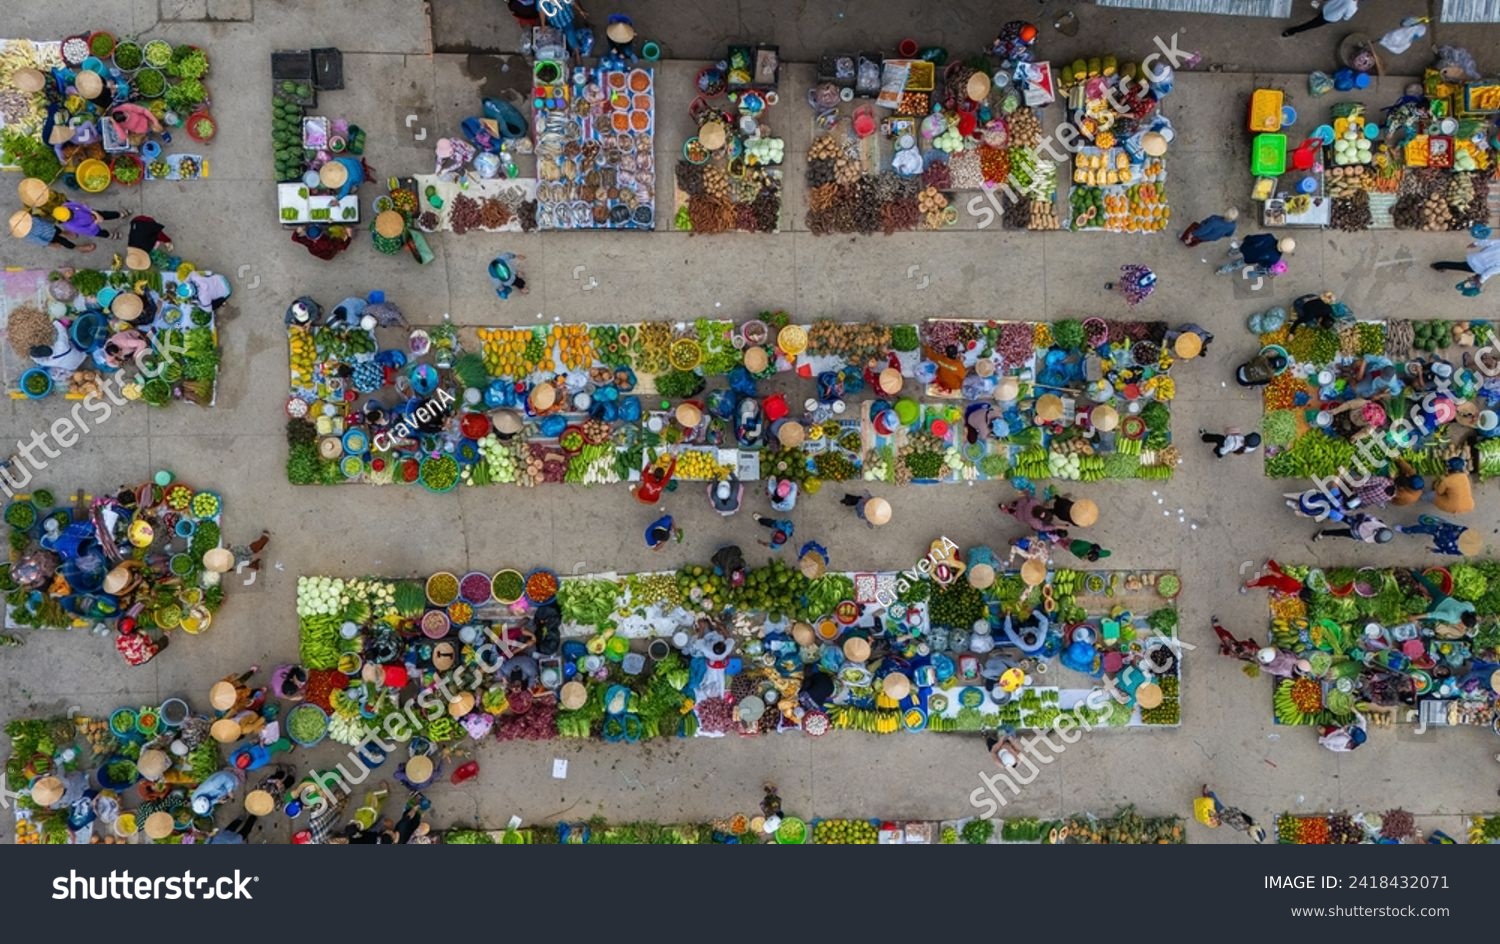 Aerial view of busy local daily life of the morning local market in Vi Thanh or Chom Hom market, Vietnam. People can seen exploring around the market. #2418432071